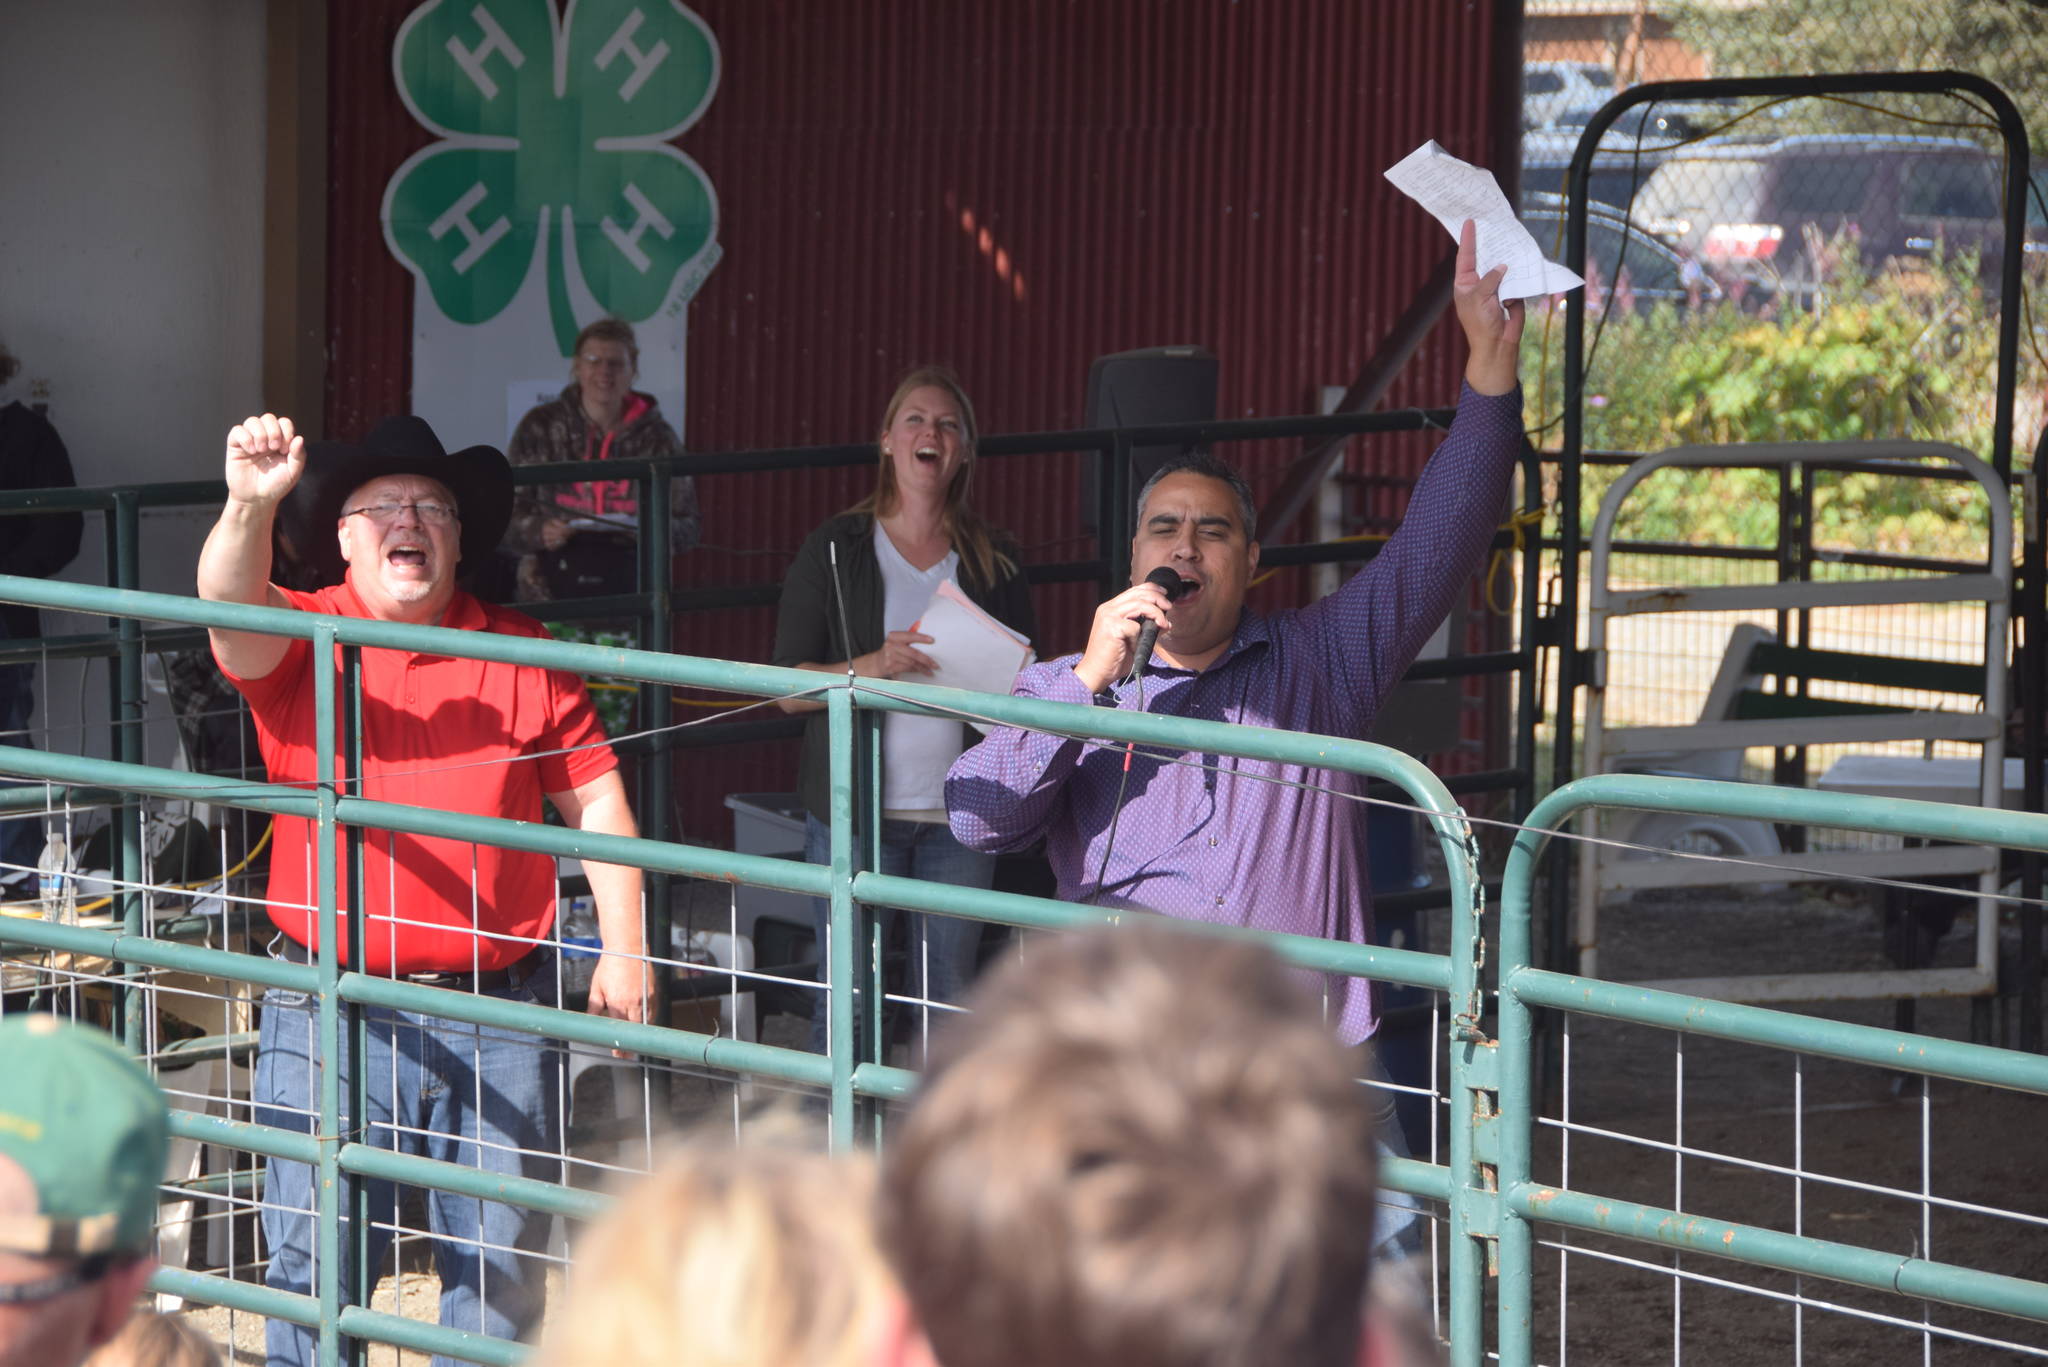 Auctioneers Andy Kriner, left, and Rayne, Reynolds, right, celebrate a successful sale during the 4H Junior Market Livestock Auction at the Kenai Peninsula Fair on Saturday, Aug. 17, 2019 at the fairgrounds in Ninilchik, Alaska. (Photo by Brian Mazurek/Peninsula Clarion)                                Auctioneers Andy Kriner, left, and Rayne, Reynolds, right, celebrate a successful sale during the 4H Junior Market Livestock Auction at the Kenai Peninsula Fair on Saturday, Aug. 17, 2019 at the fairgrounds in Ninilchik, Alaska. (Photo by Brian Mazurek/Peninsula Clarion)